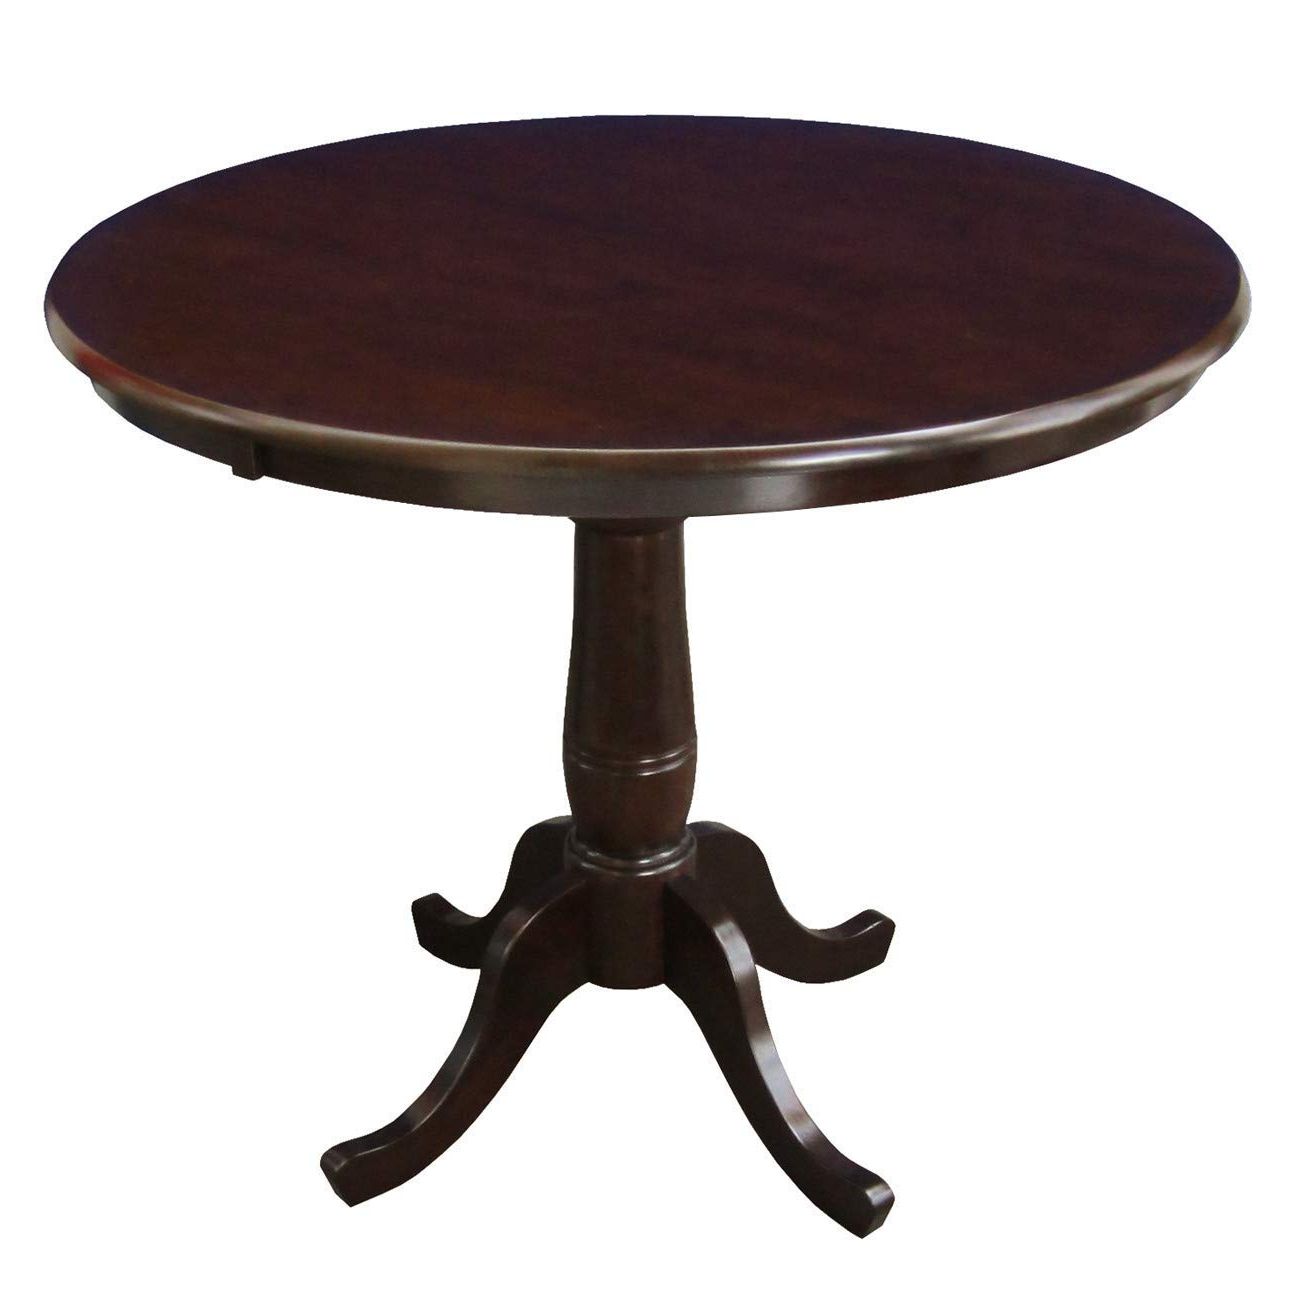 Transitional Antique Walnut Drop Leaf Casual Dining Tables In Trendy Cheap Wood Dining Table Round, Find Wood Dining Table Round (View 15 of 25)